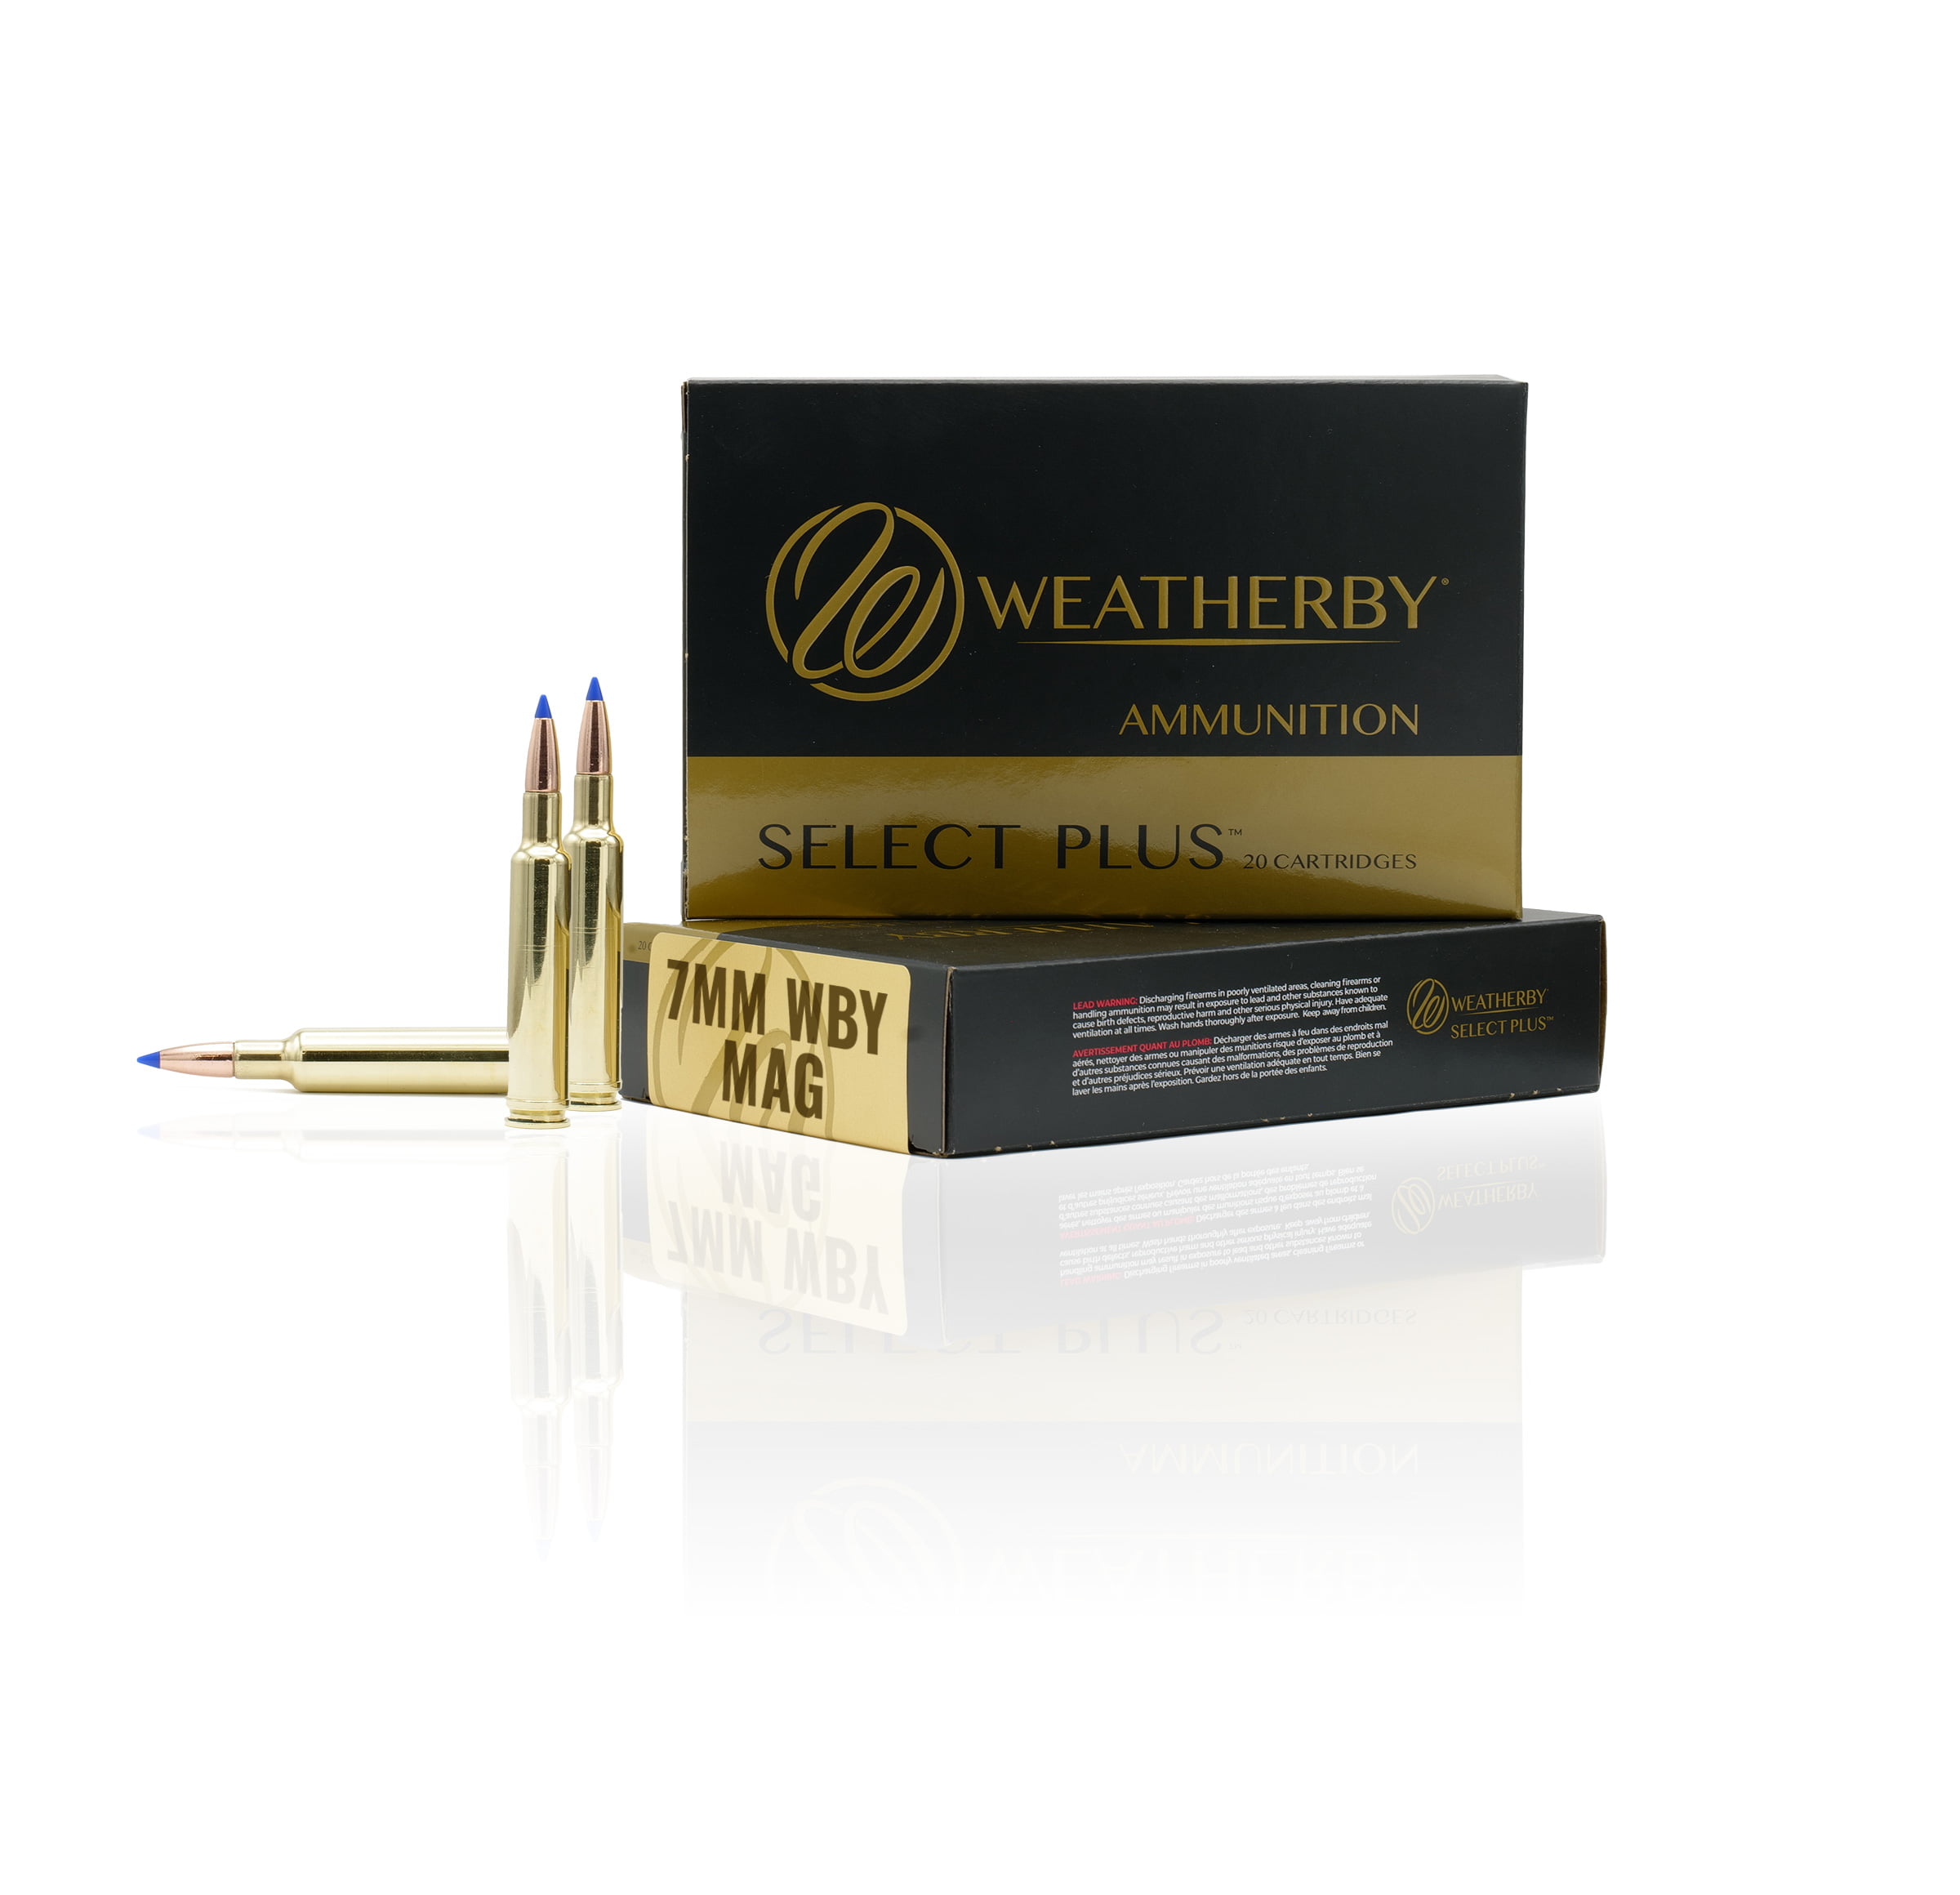 7mm Weatherby Magnum - Weatherby, Inc.